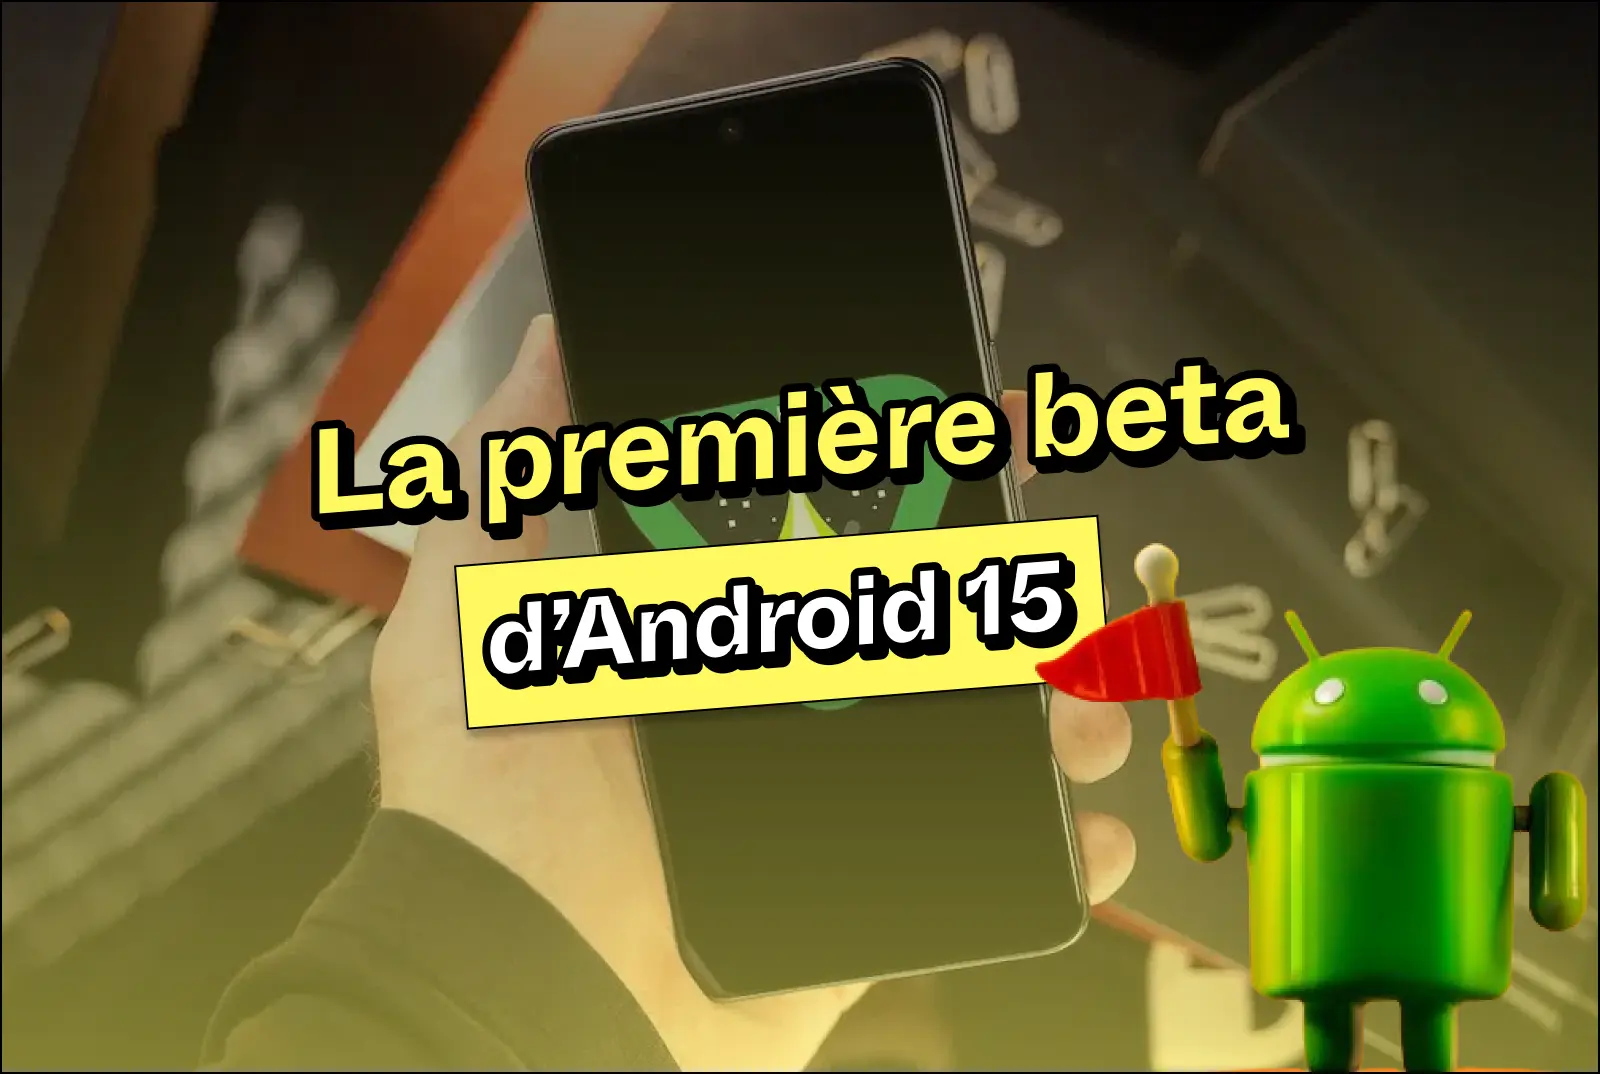 Android 15 beta announcement on smartphone screen.